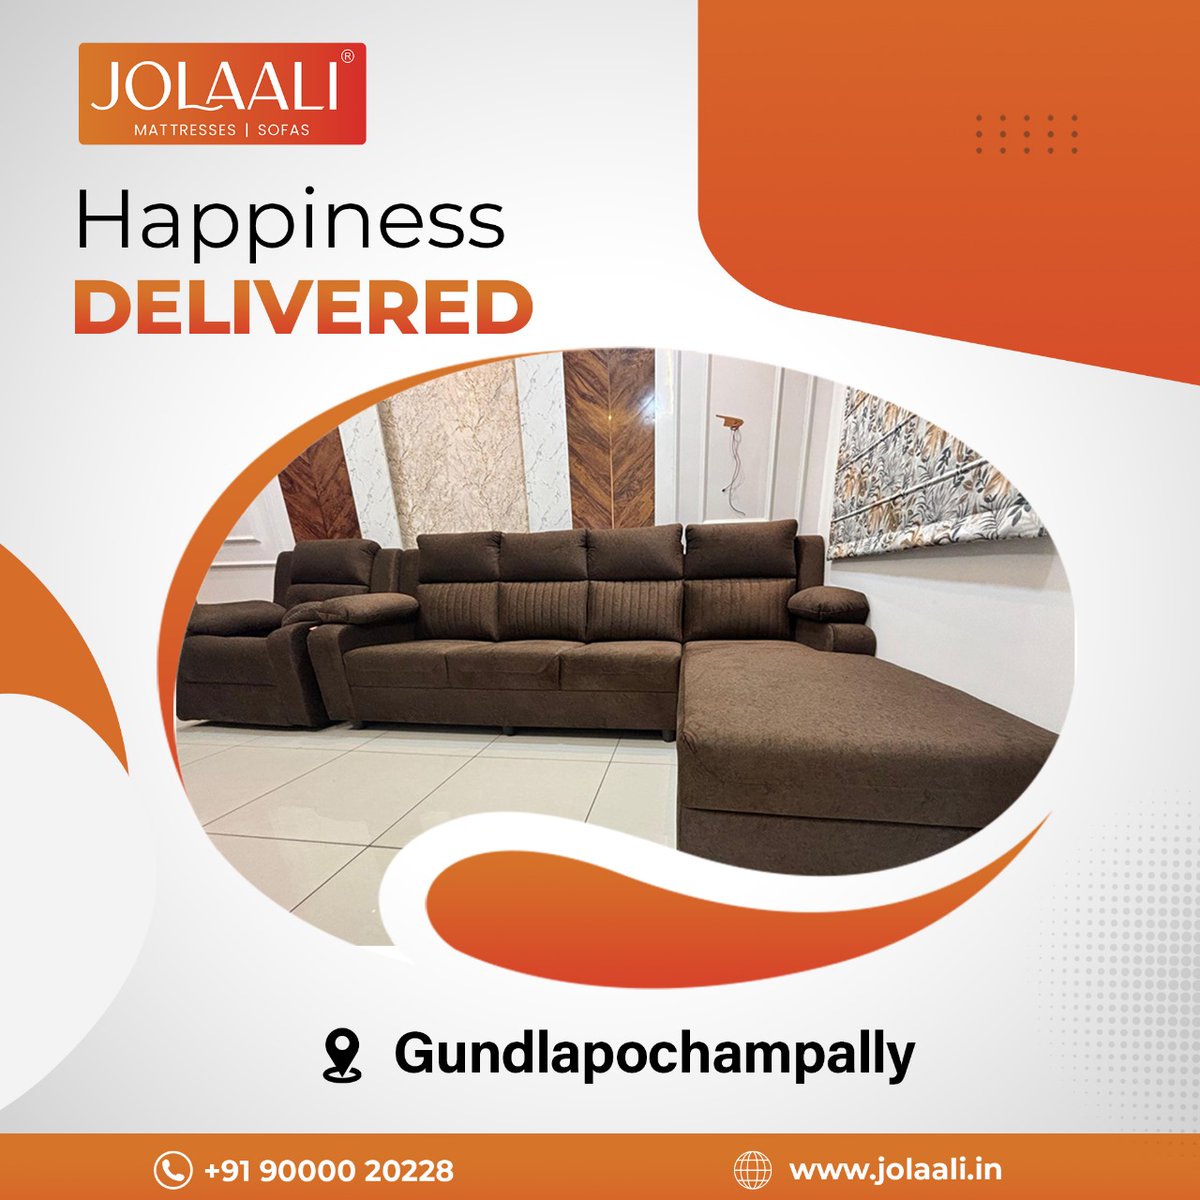 Delivering smiles, one package at a time! 📦 Our latest Jolaali products have arrived at their destinations. Enjoy the elegance and quality, and thank you for being part of the Jolaali family!

#CustomerSatisfaction #Jolaali #customsofamakers #bestmattressstoreinhyderabad